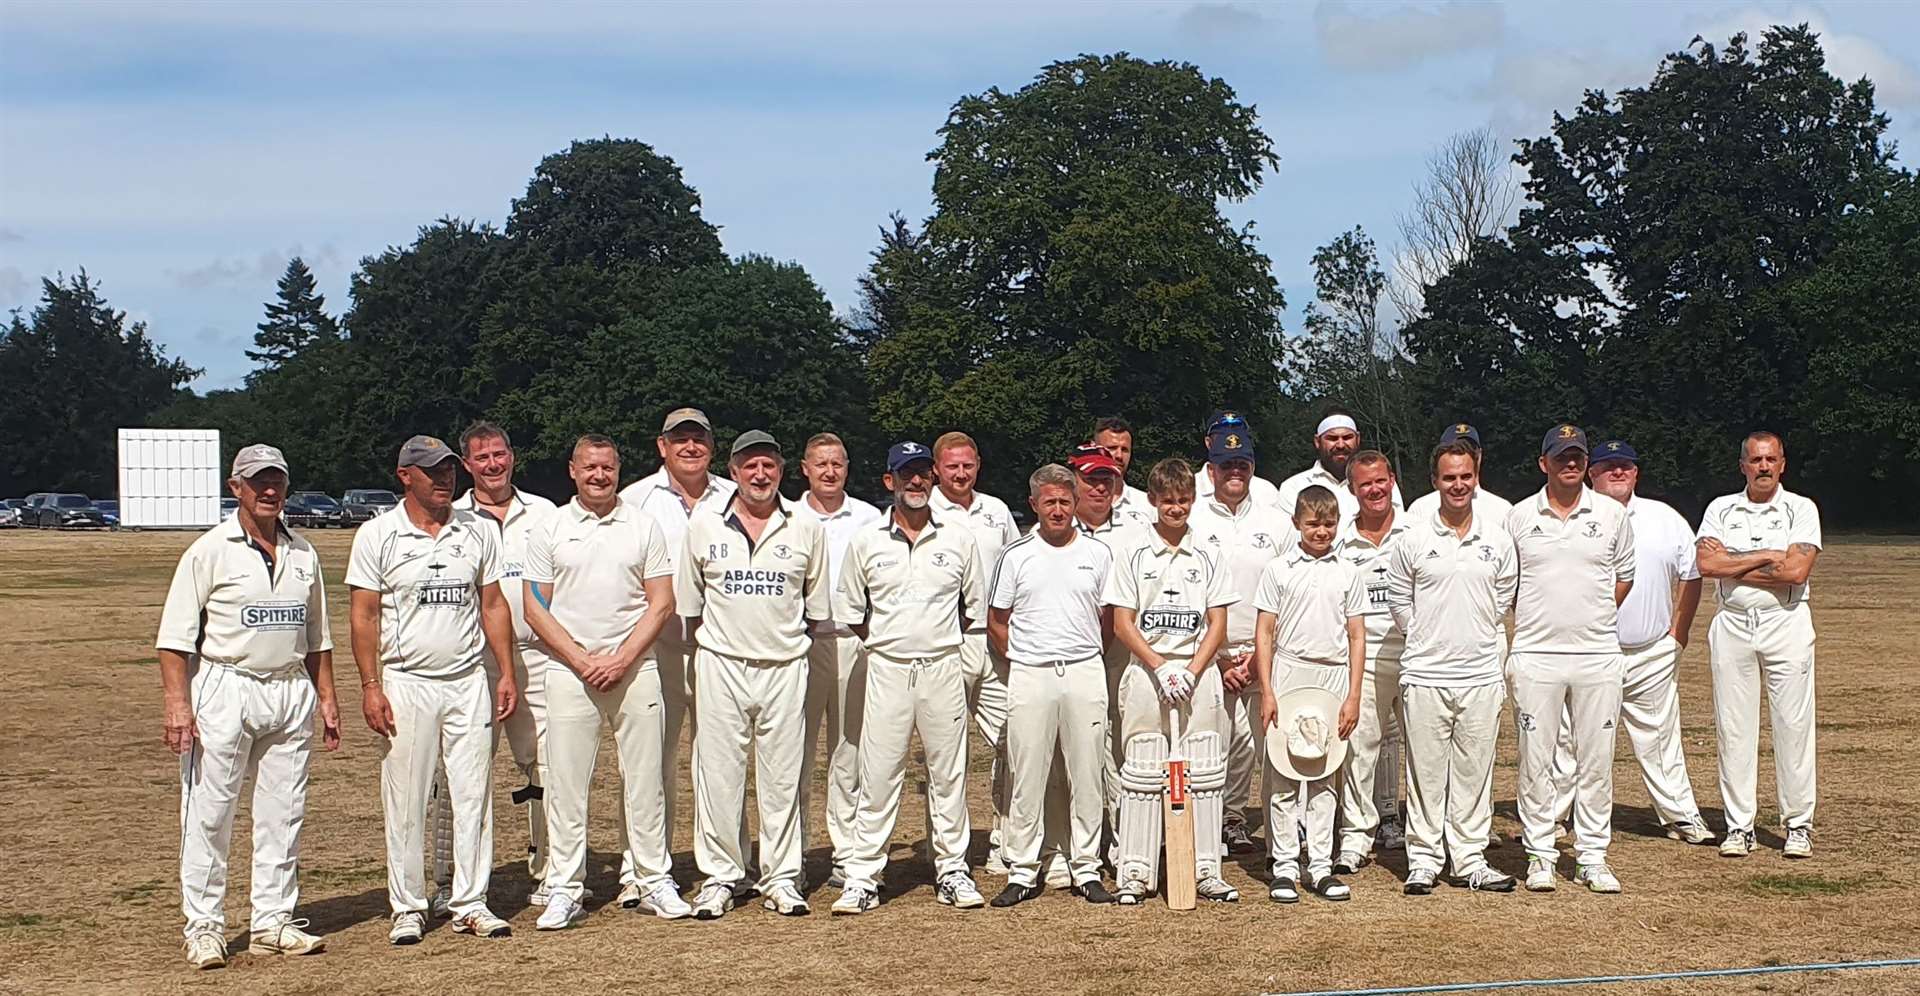 The two teams which played in the T20 game to mark Sheldwich Cricket Club's 100th year celebrations